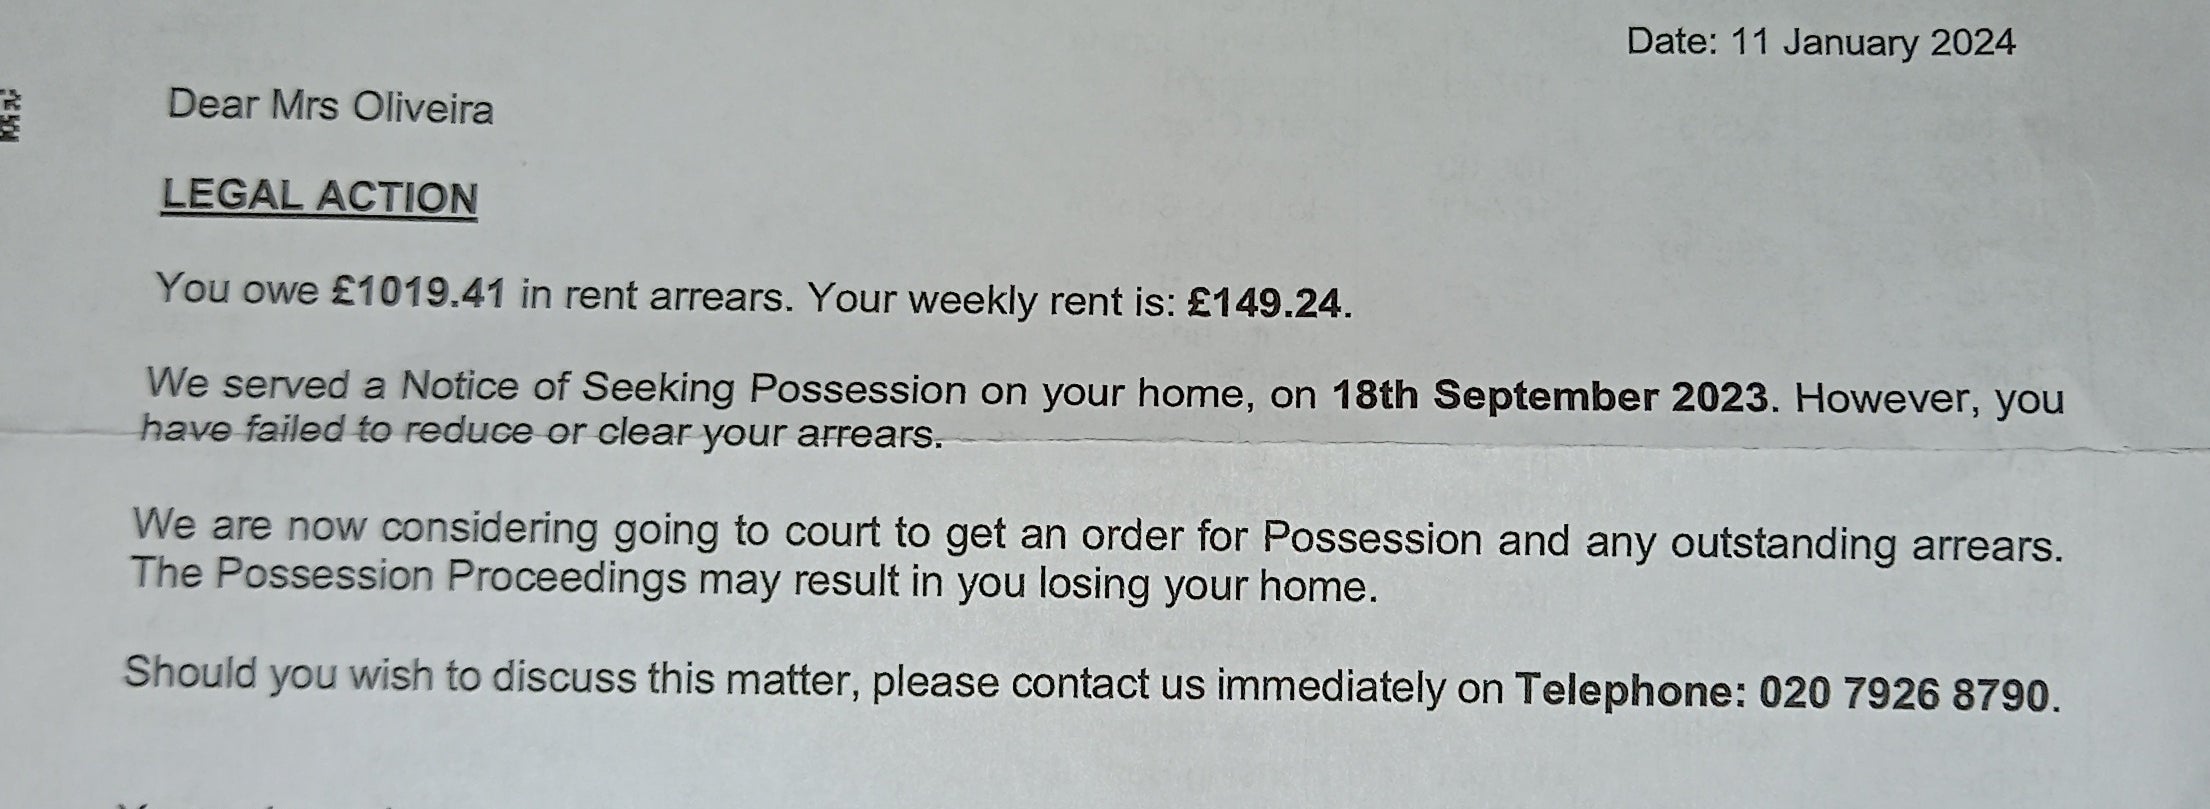 Kirsty is one of several tenants that been served notice of posession letters after she fell into over £1,000 of rental arrears